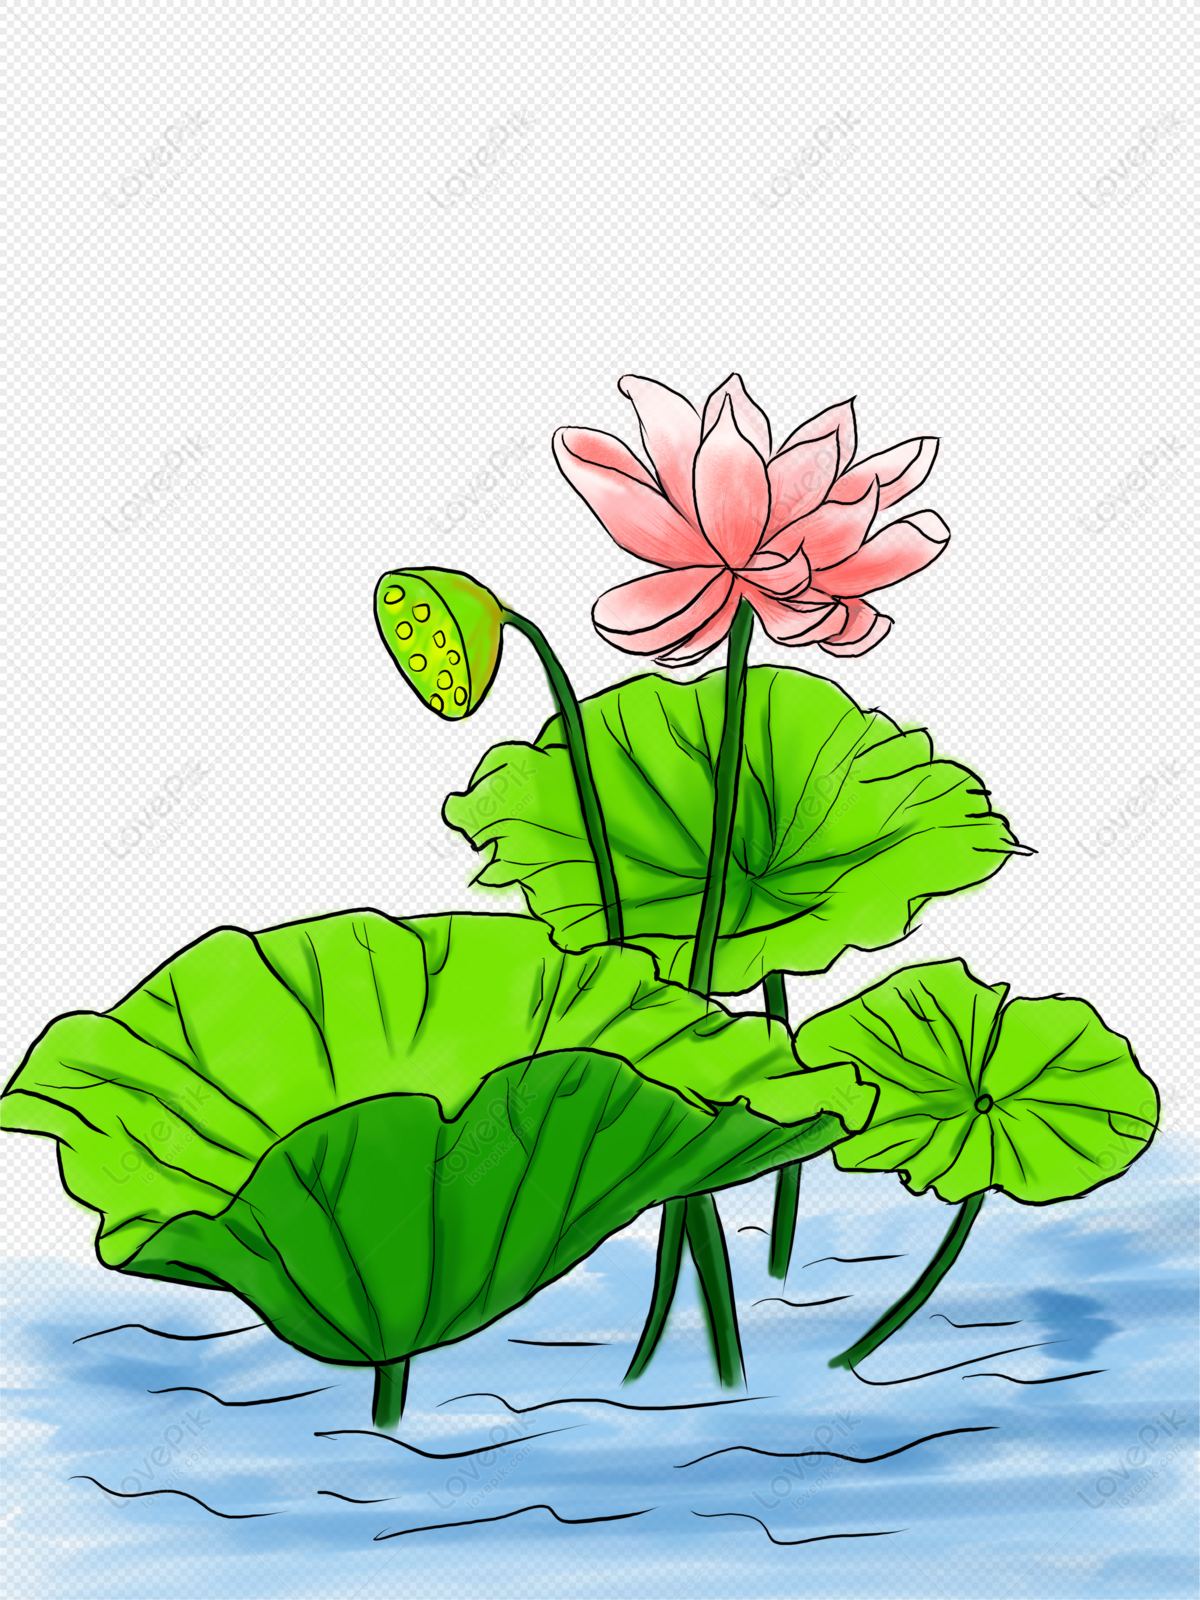 Lotus. Pencil Lotus Flower. Water Lily. Pencil Drawing of a Water Lily  Flower Stock Illustration - Illustration of branch, line: 217623309